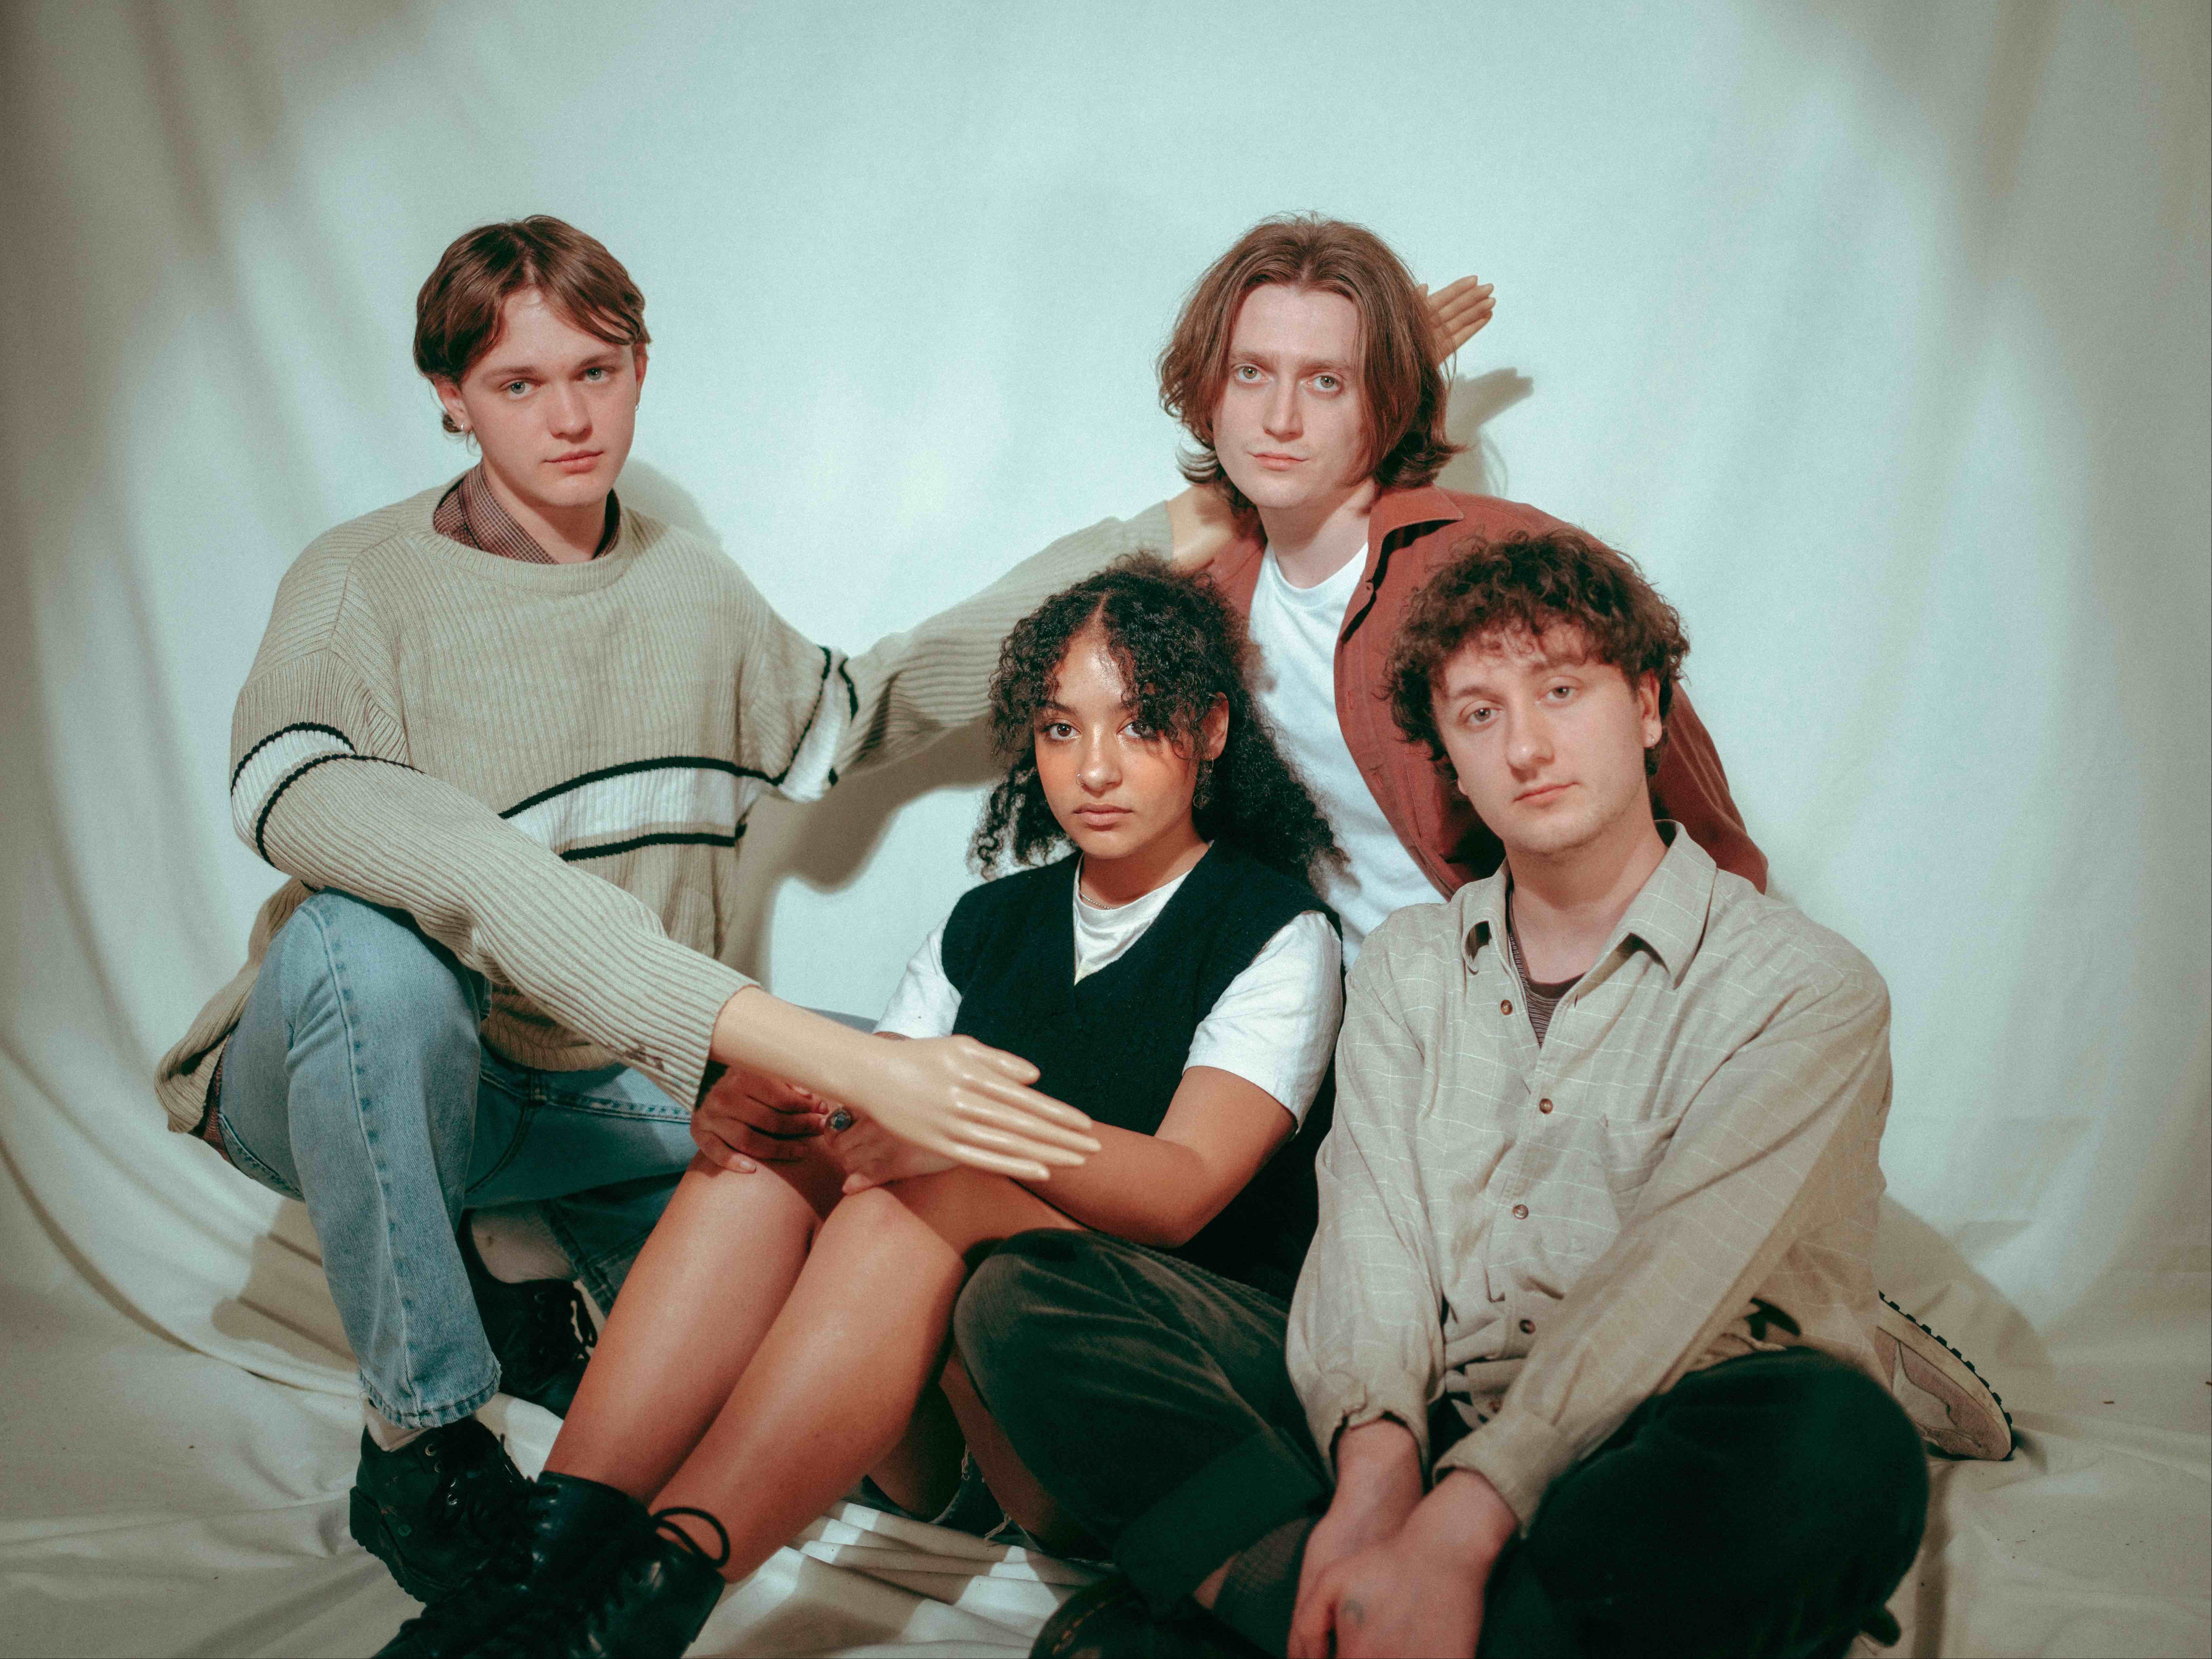 English Teacher (l-r): Douglas Frost, Lily Fontaine, Nick Eden, Lewis Whiting